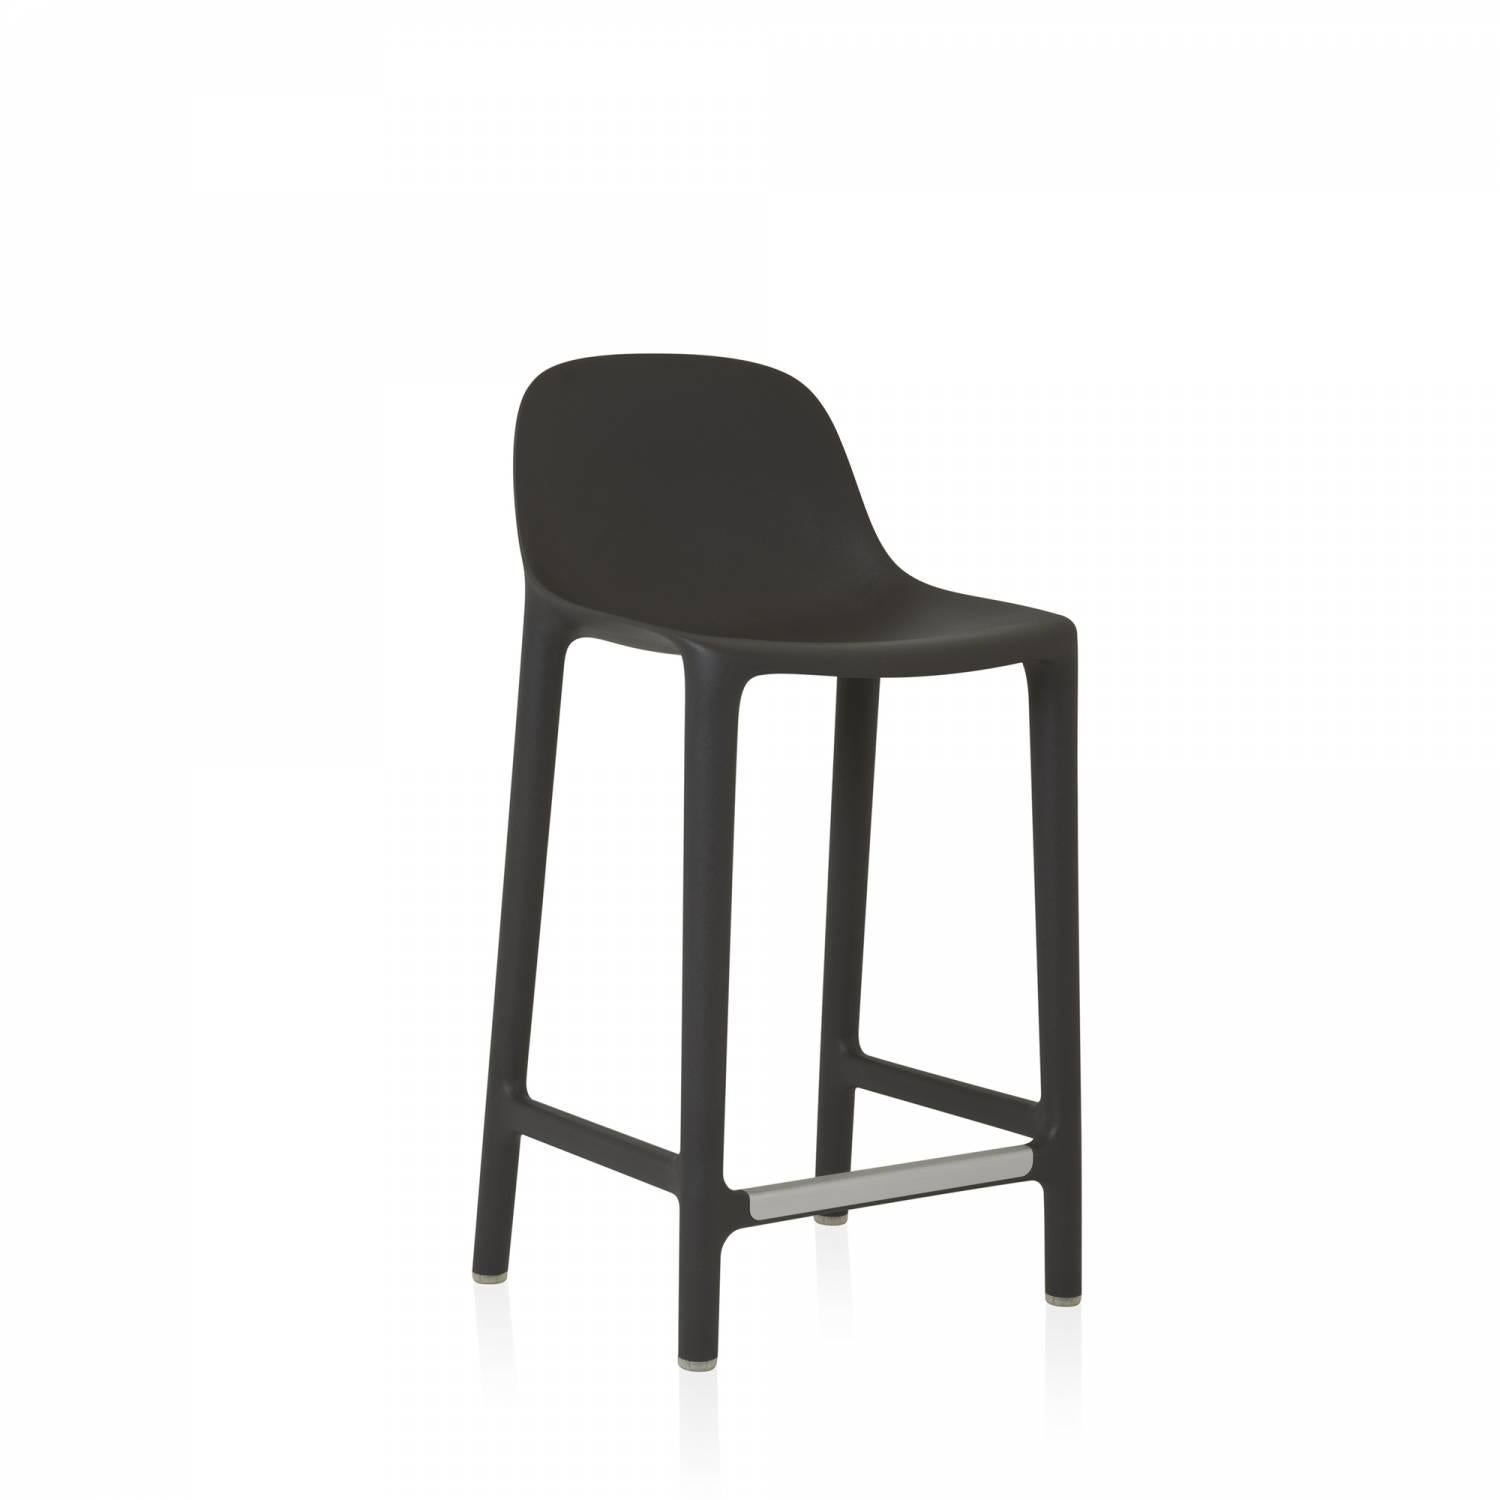 Philippe Starck and Emeco came together to create a new chair that is reclaimed, repurposed, recyclable – and designed to last. The chair is made from 75% waste polypropylene and 15% reclaimed wood that would normally be swept into the trash,